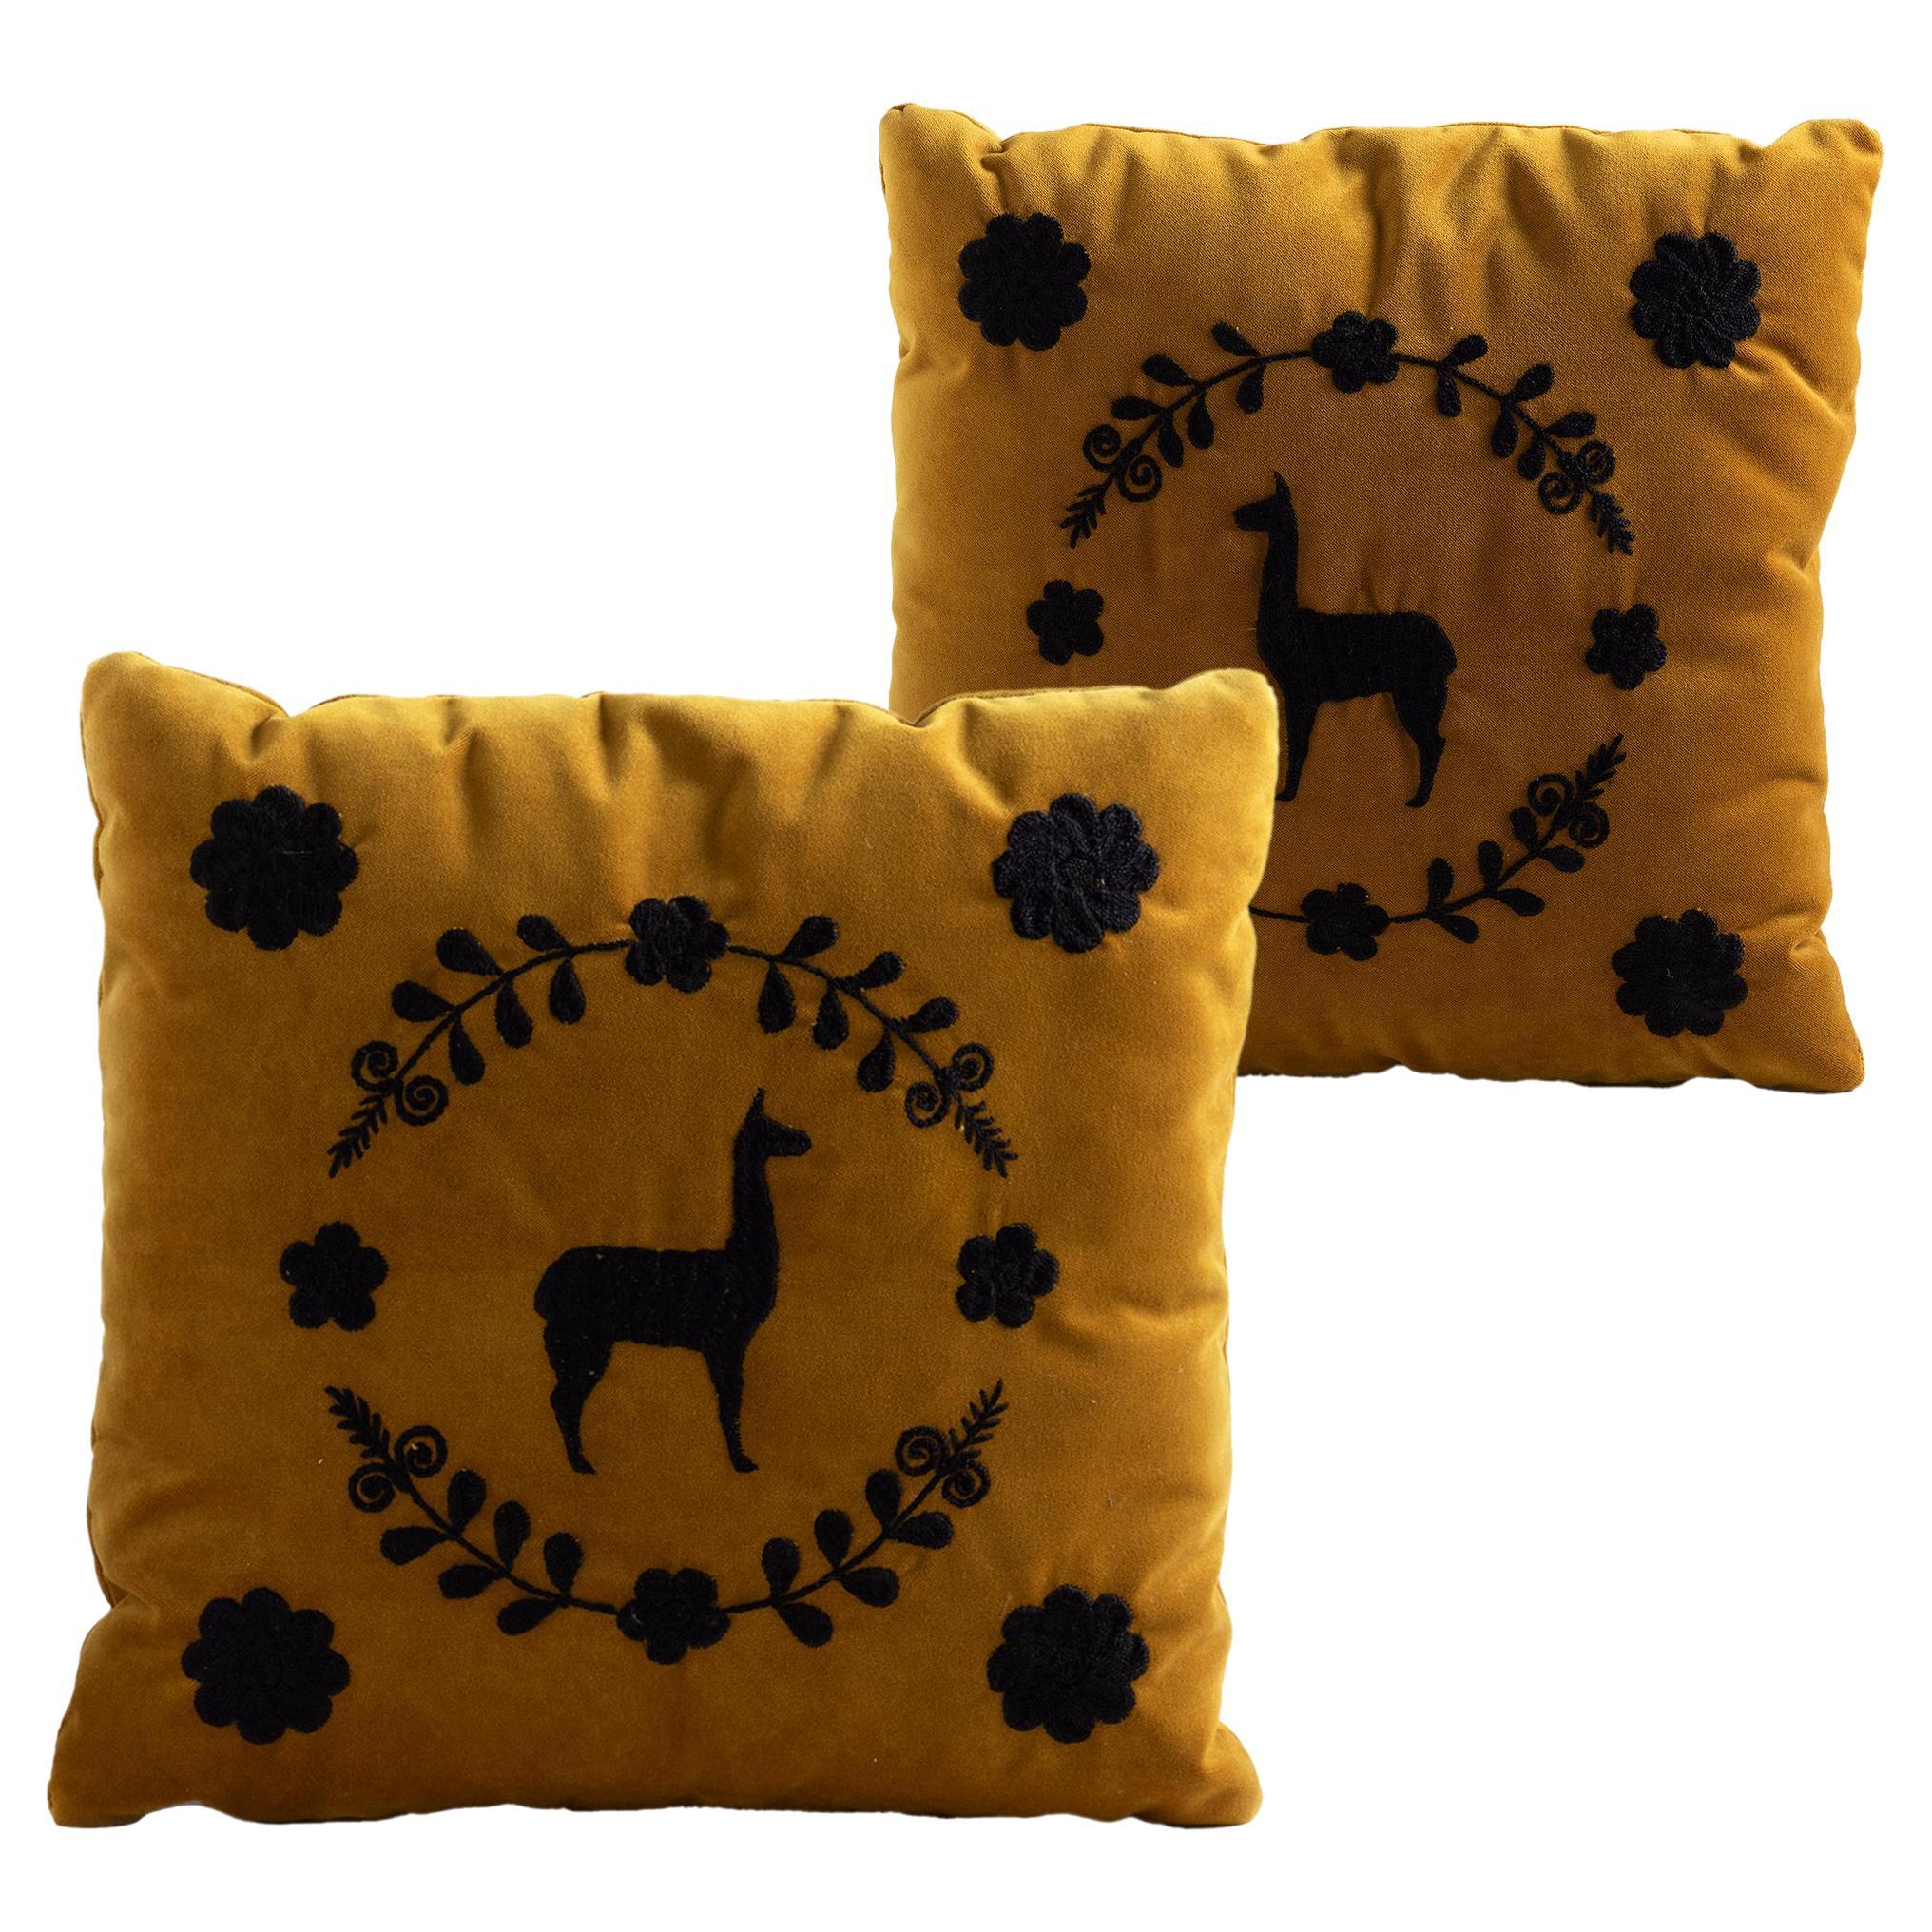 LLAMA Hand Embroidered Decorative Pillows in Ochre Velvet by ANDEAN, Set of 2